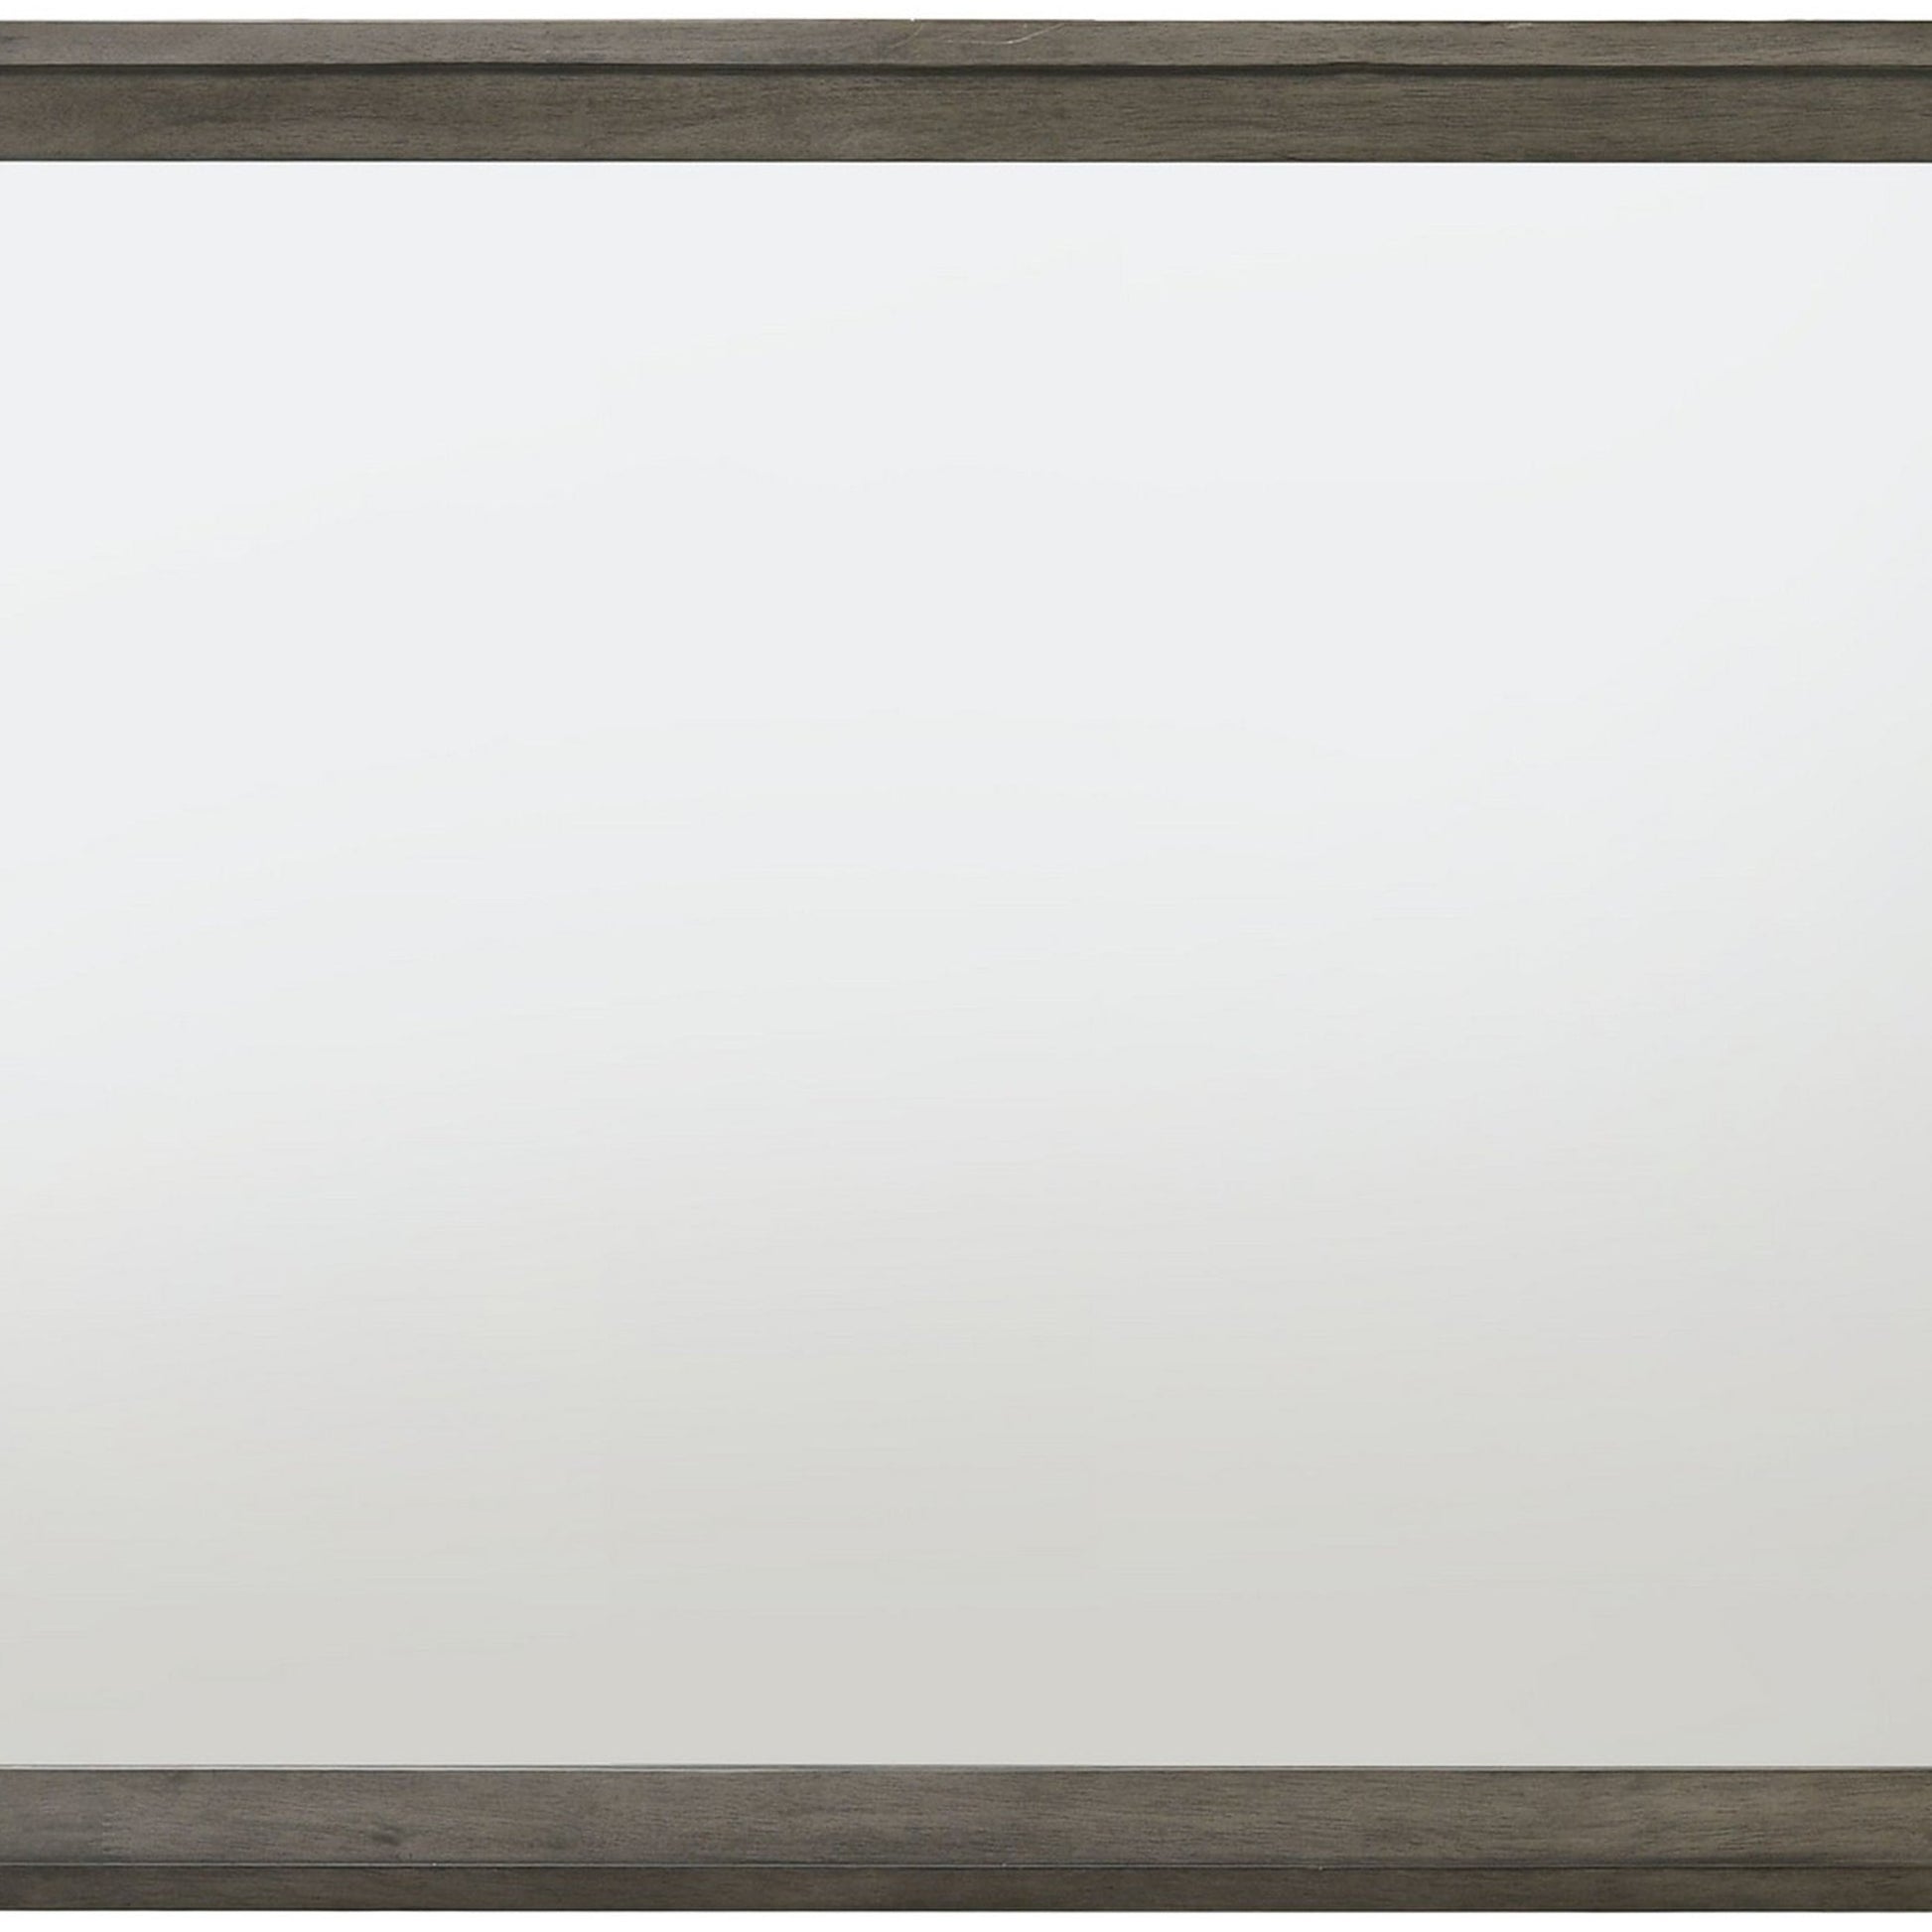 Benzara Gray and Silver Rectangular Wooden Frame Mirror With Mounting Hardware